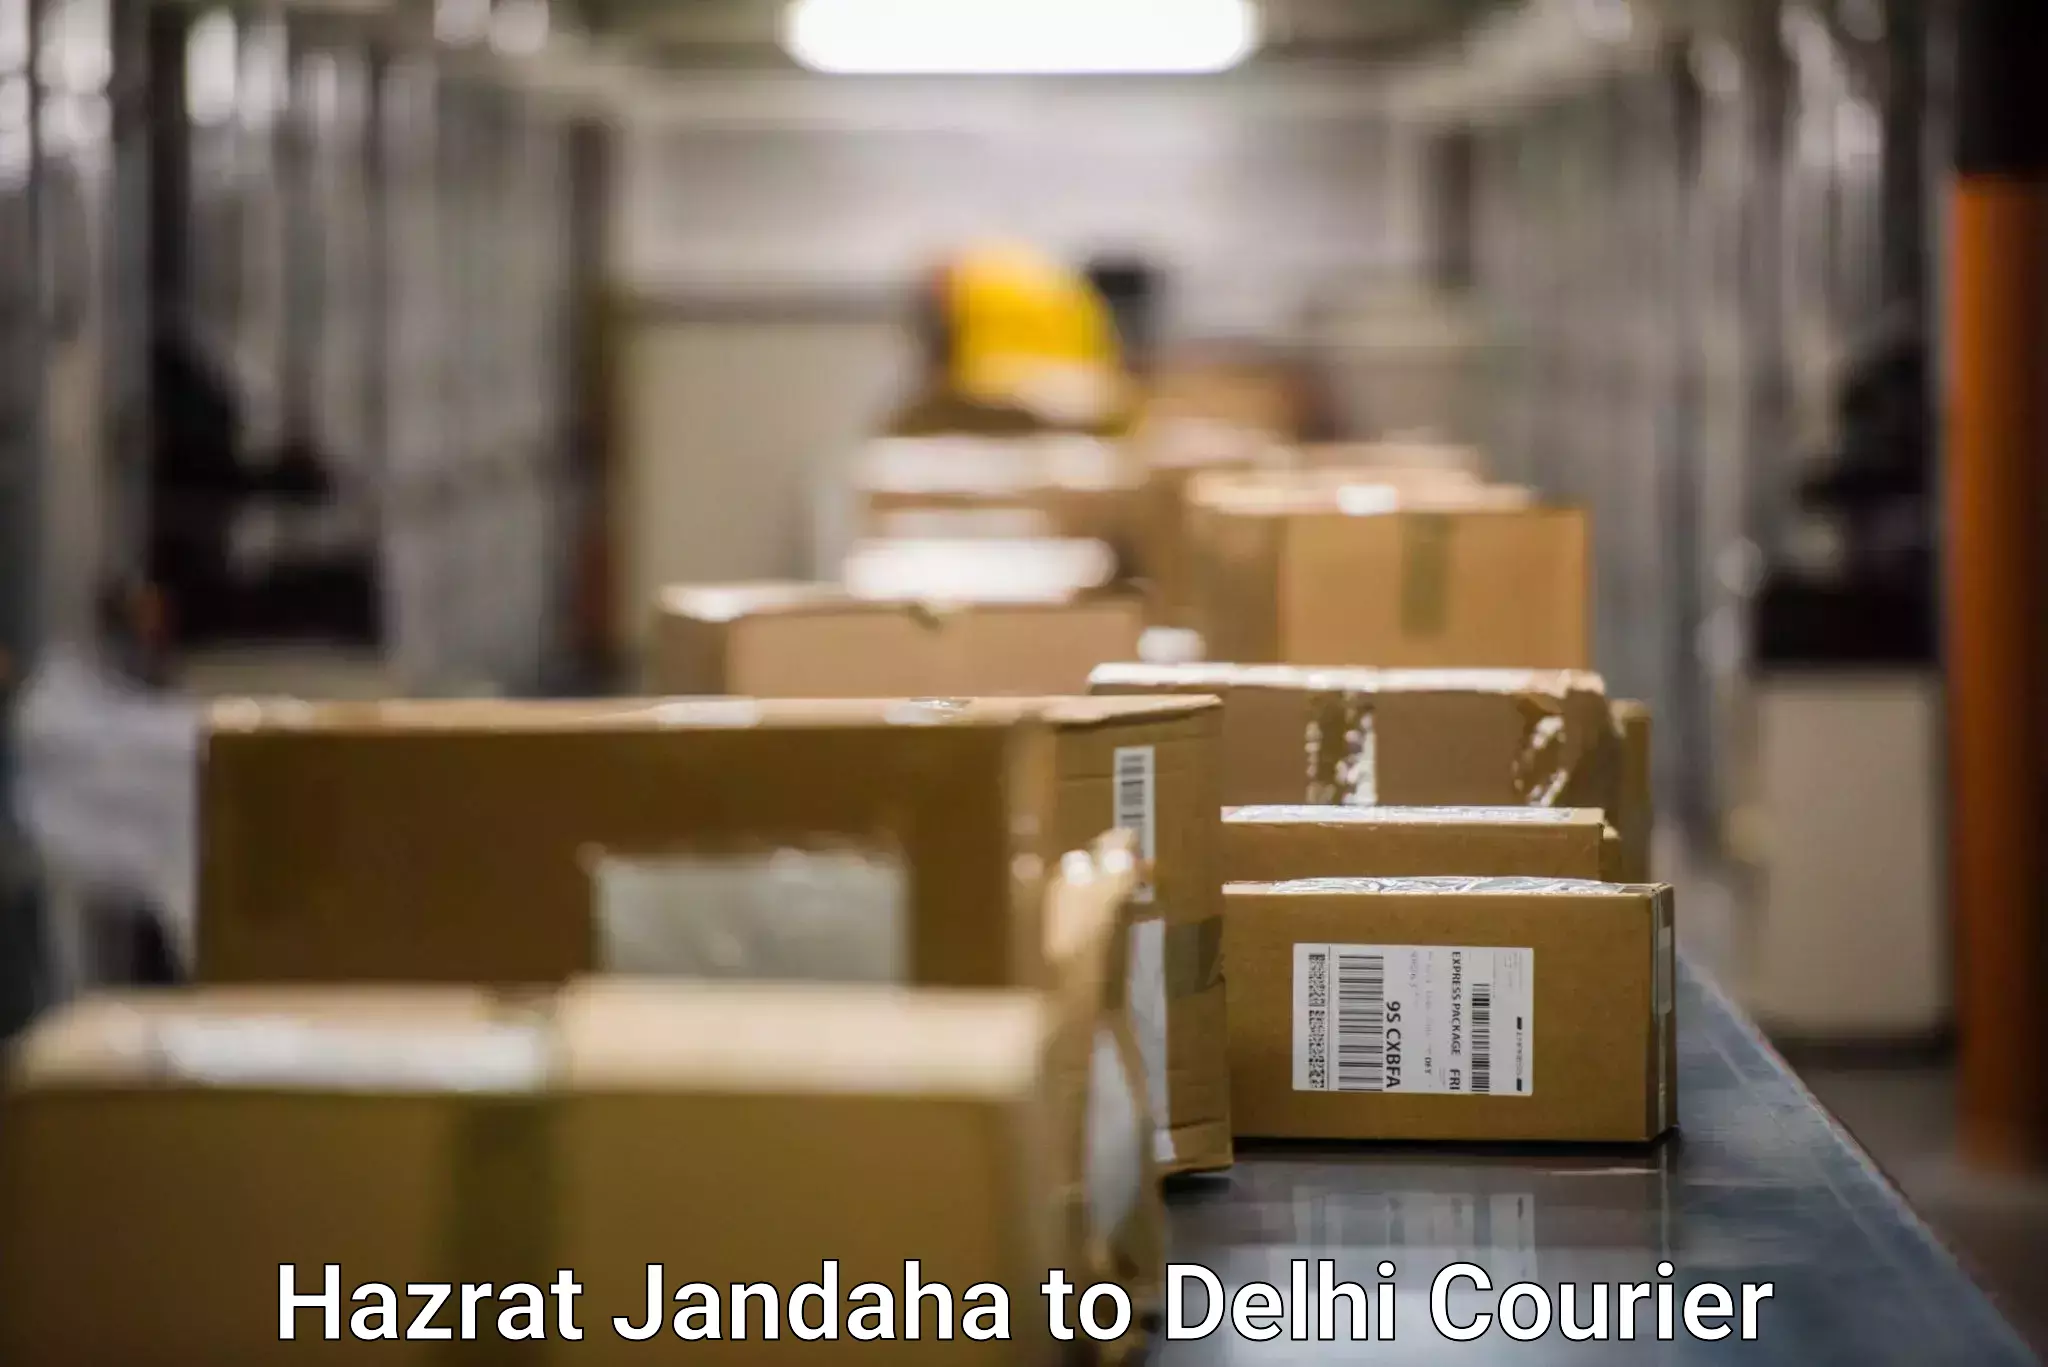 State-of-the-art courier technology Hazrat Jandaha to East Delhi